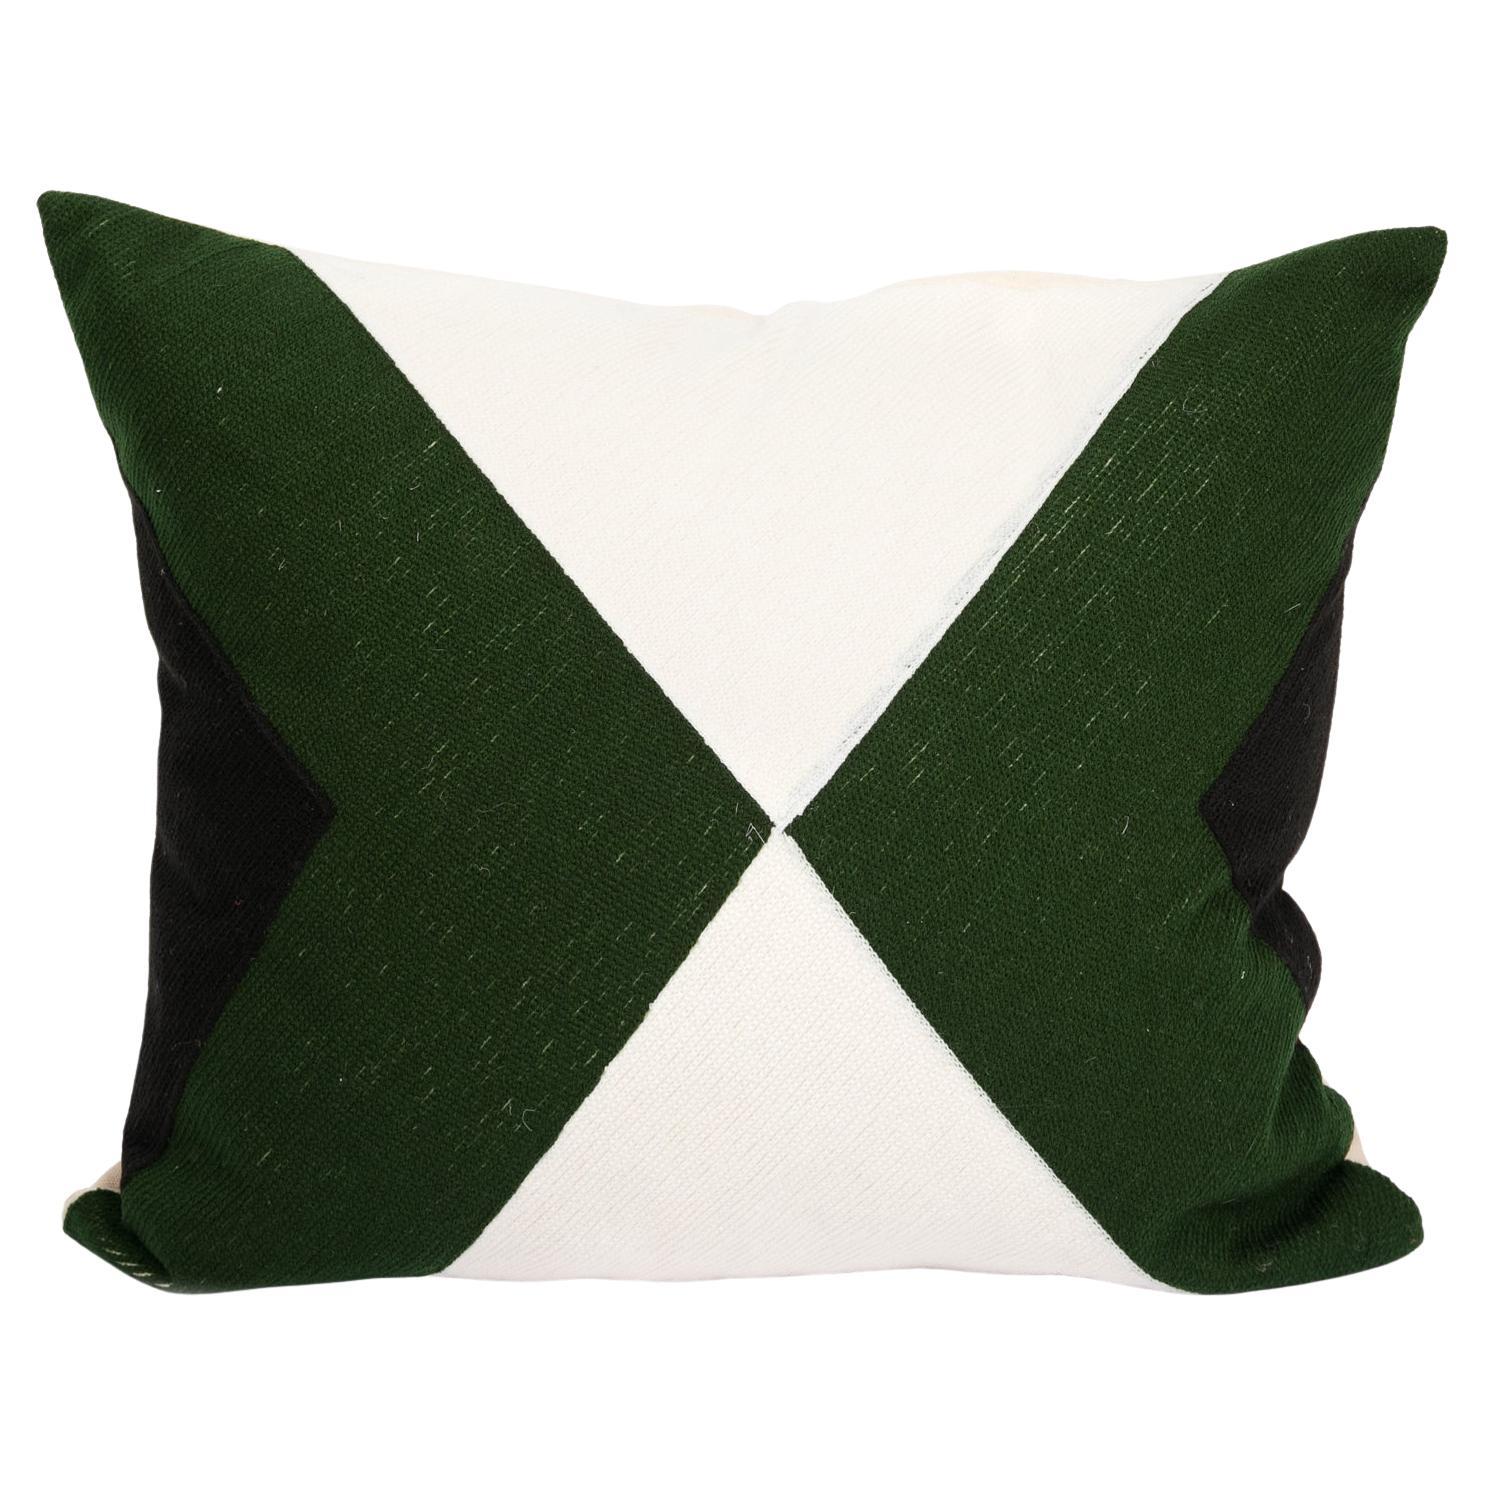 Modern Kilombo Home Embroidery Pillow Cushion Cotton Bee Ivory Black& Dark Green For Sale